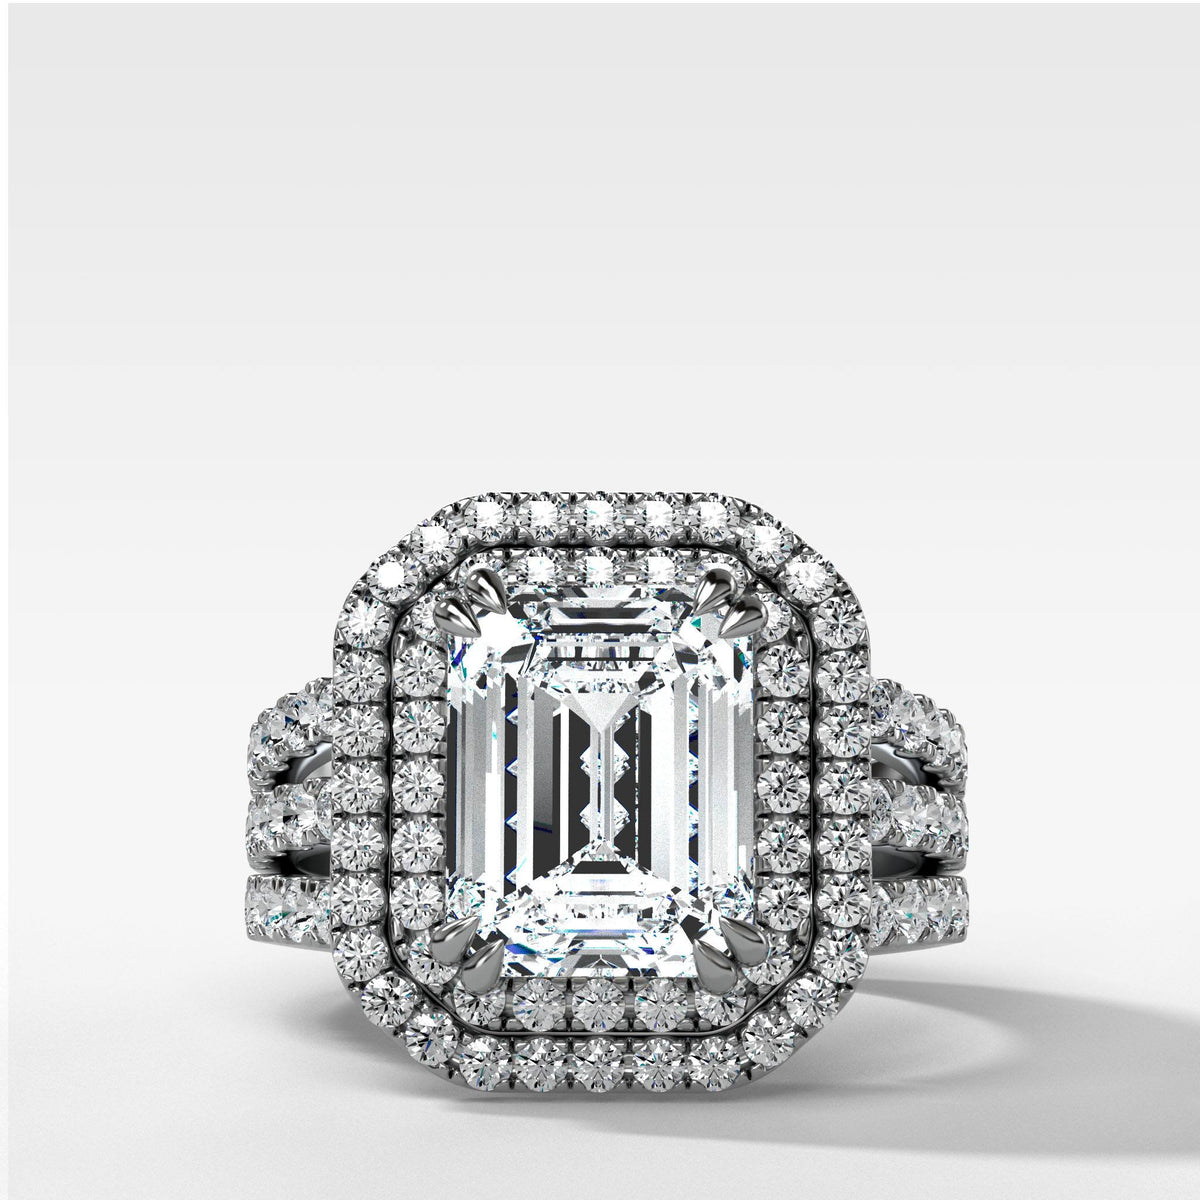 Double Halo Triple Shank Engagement Ring With Emerald Cut by Good Stone in White Gold